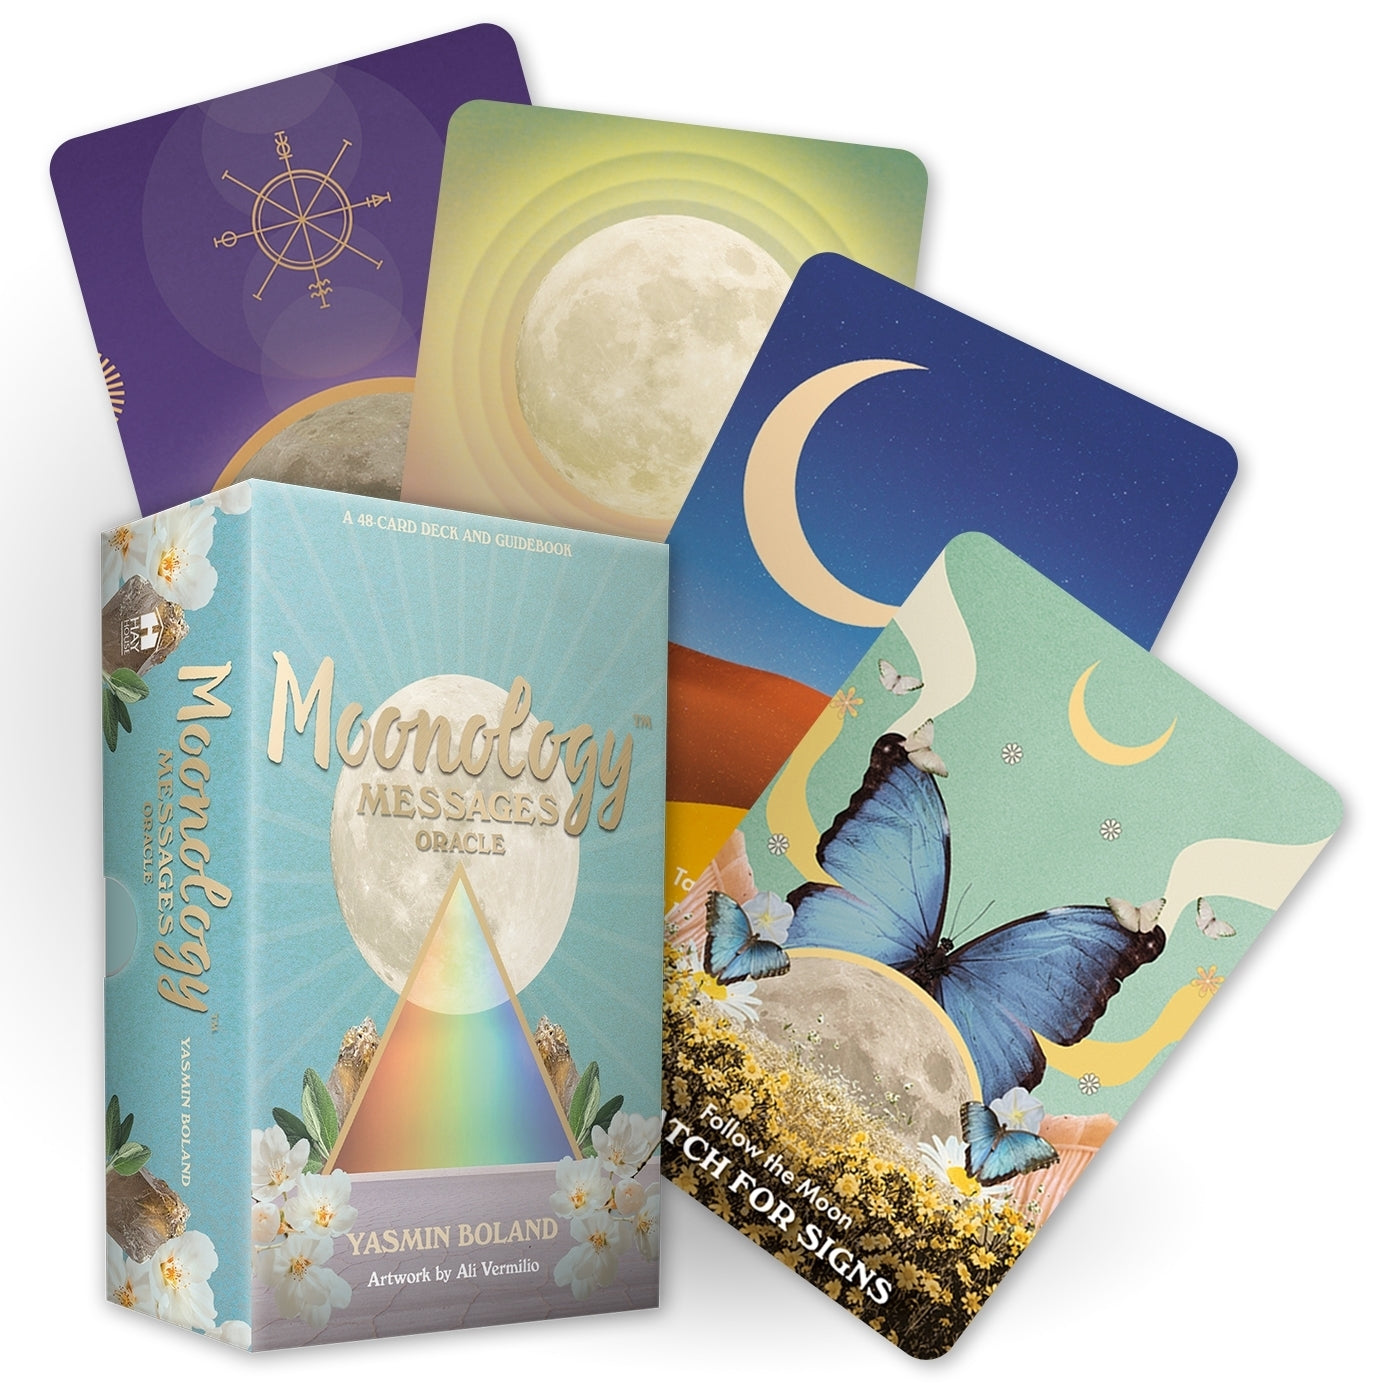 Moonology (TM) Messages Oracle: A 48-Card Deck and Guidebook